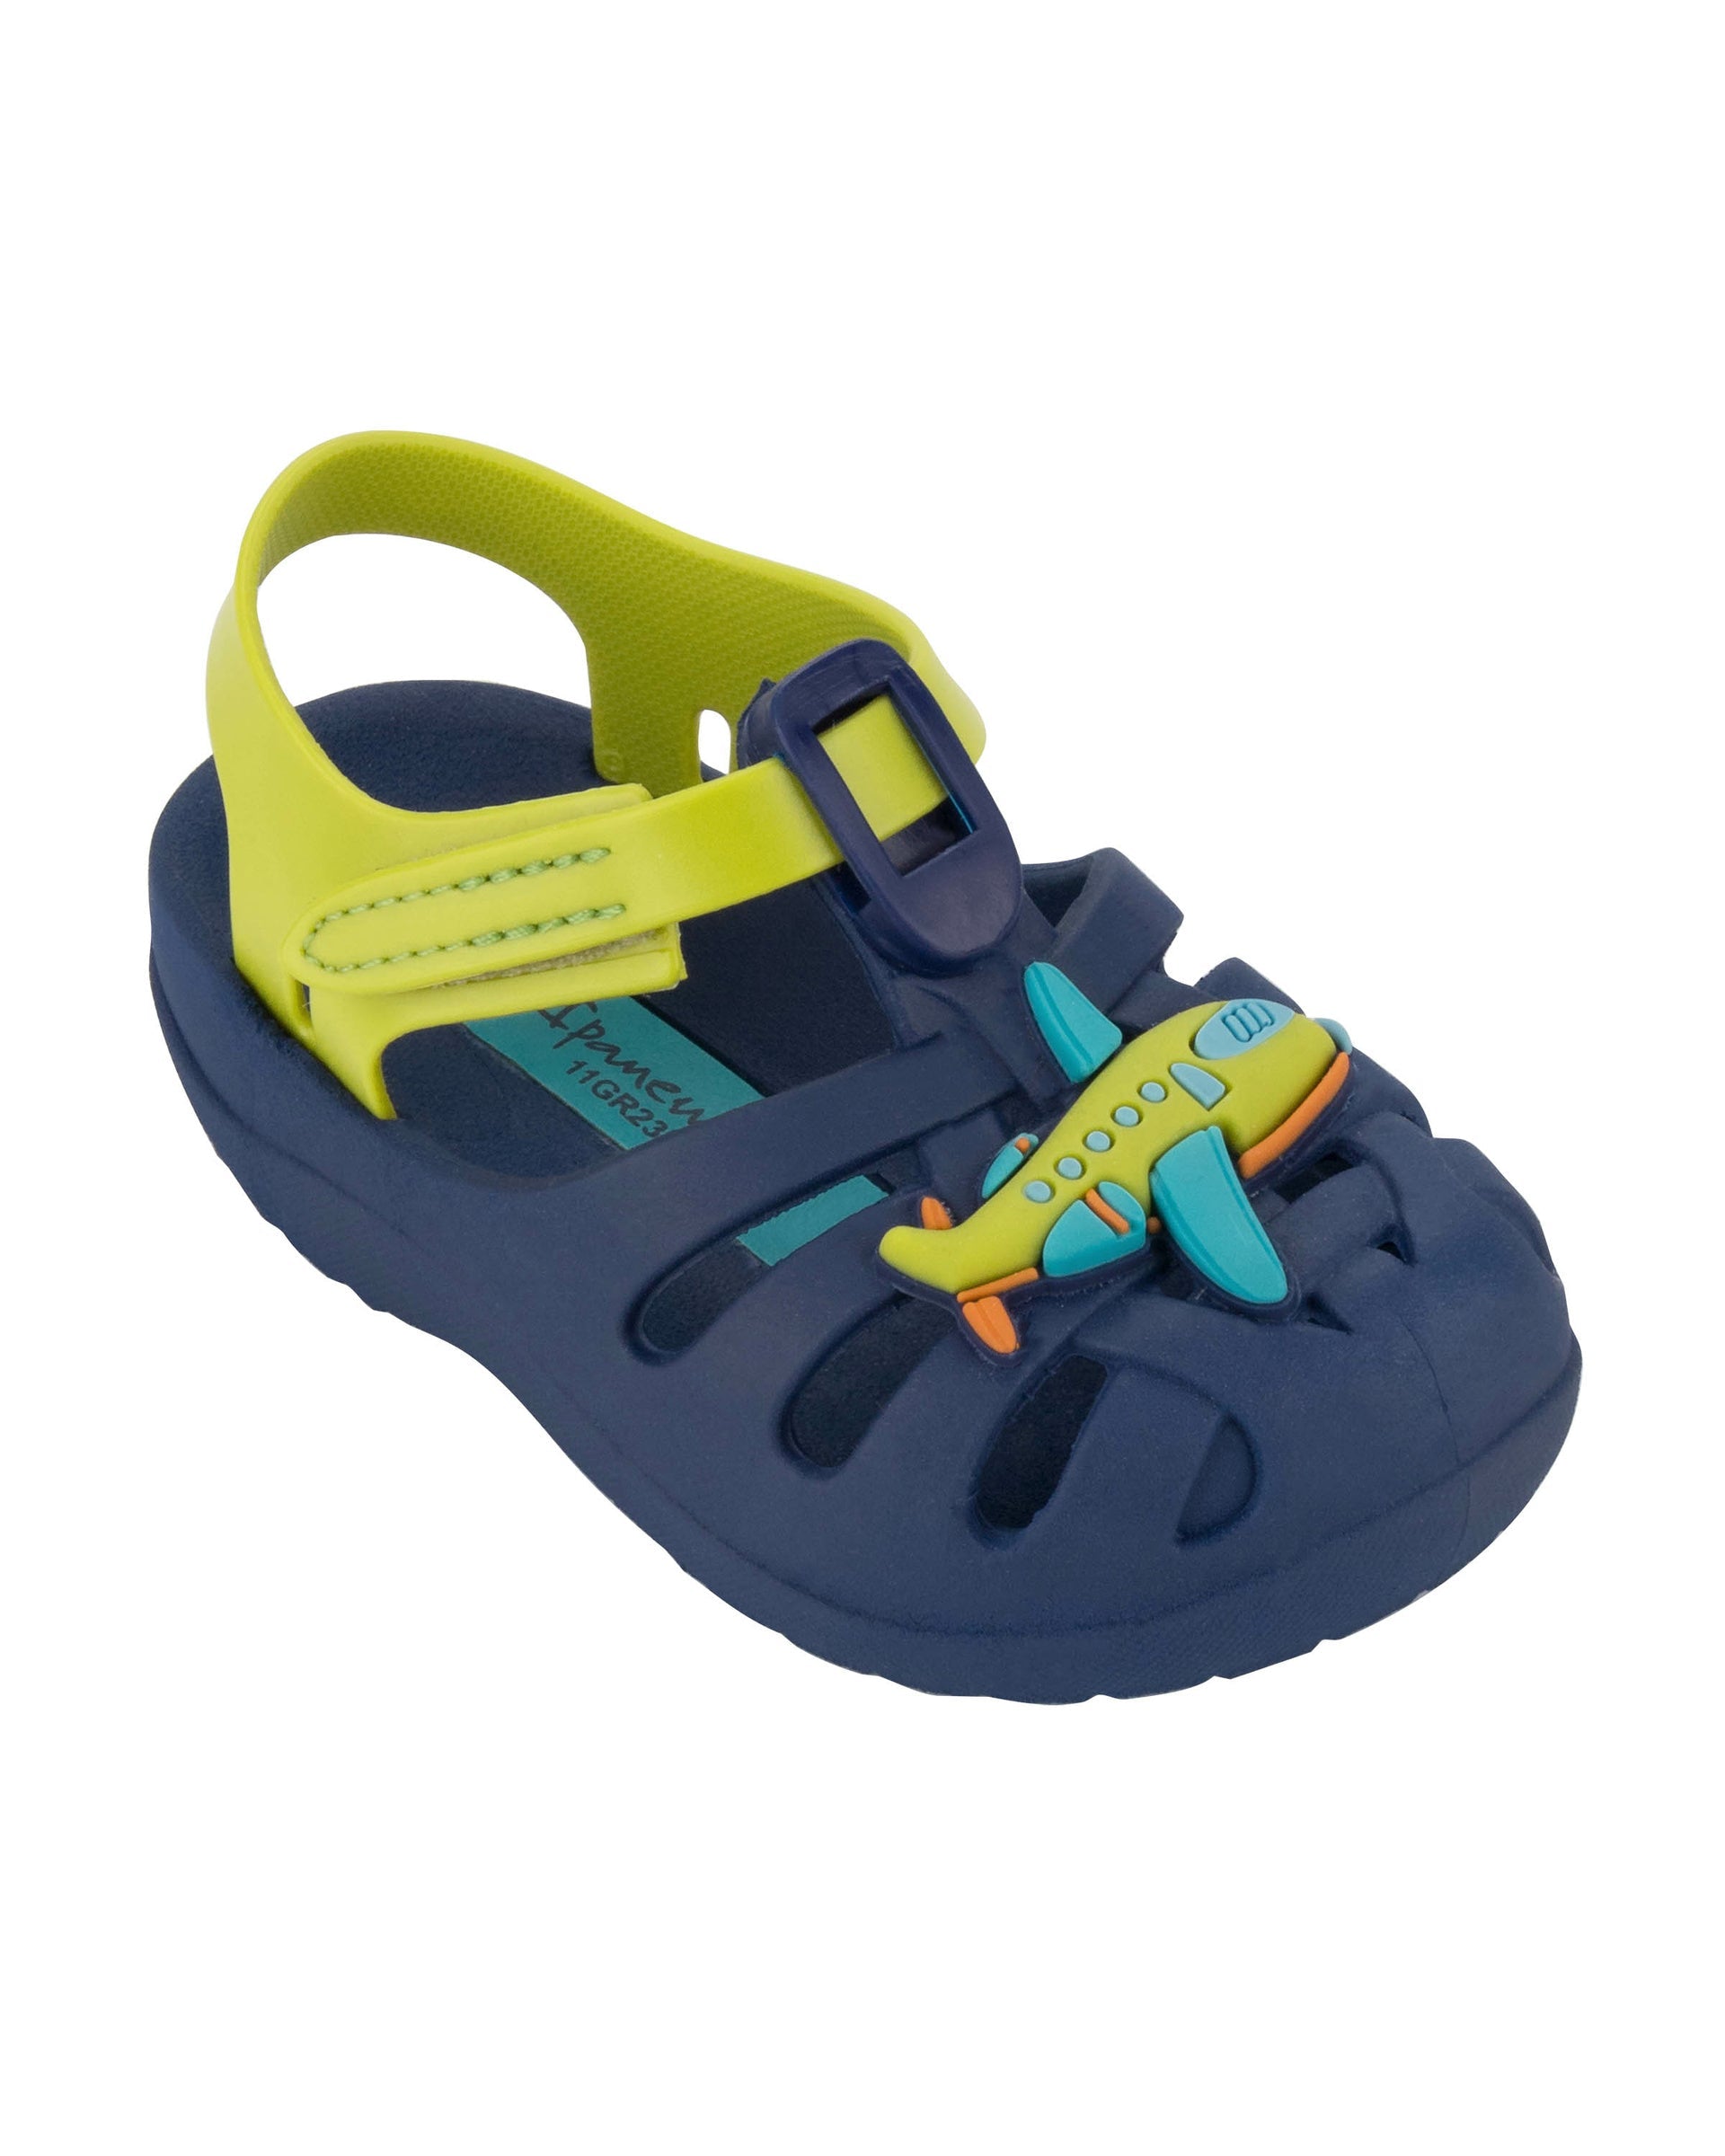 Angled view of a blue Ipanema Summer baby sandal with airplane on the upper and a green strap.